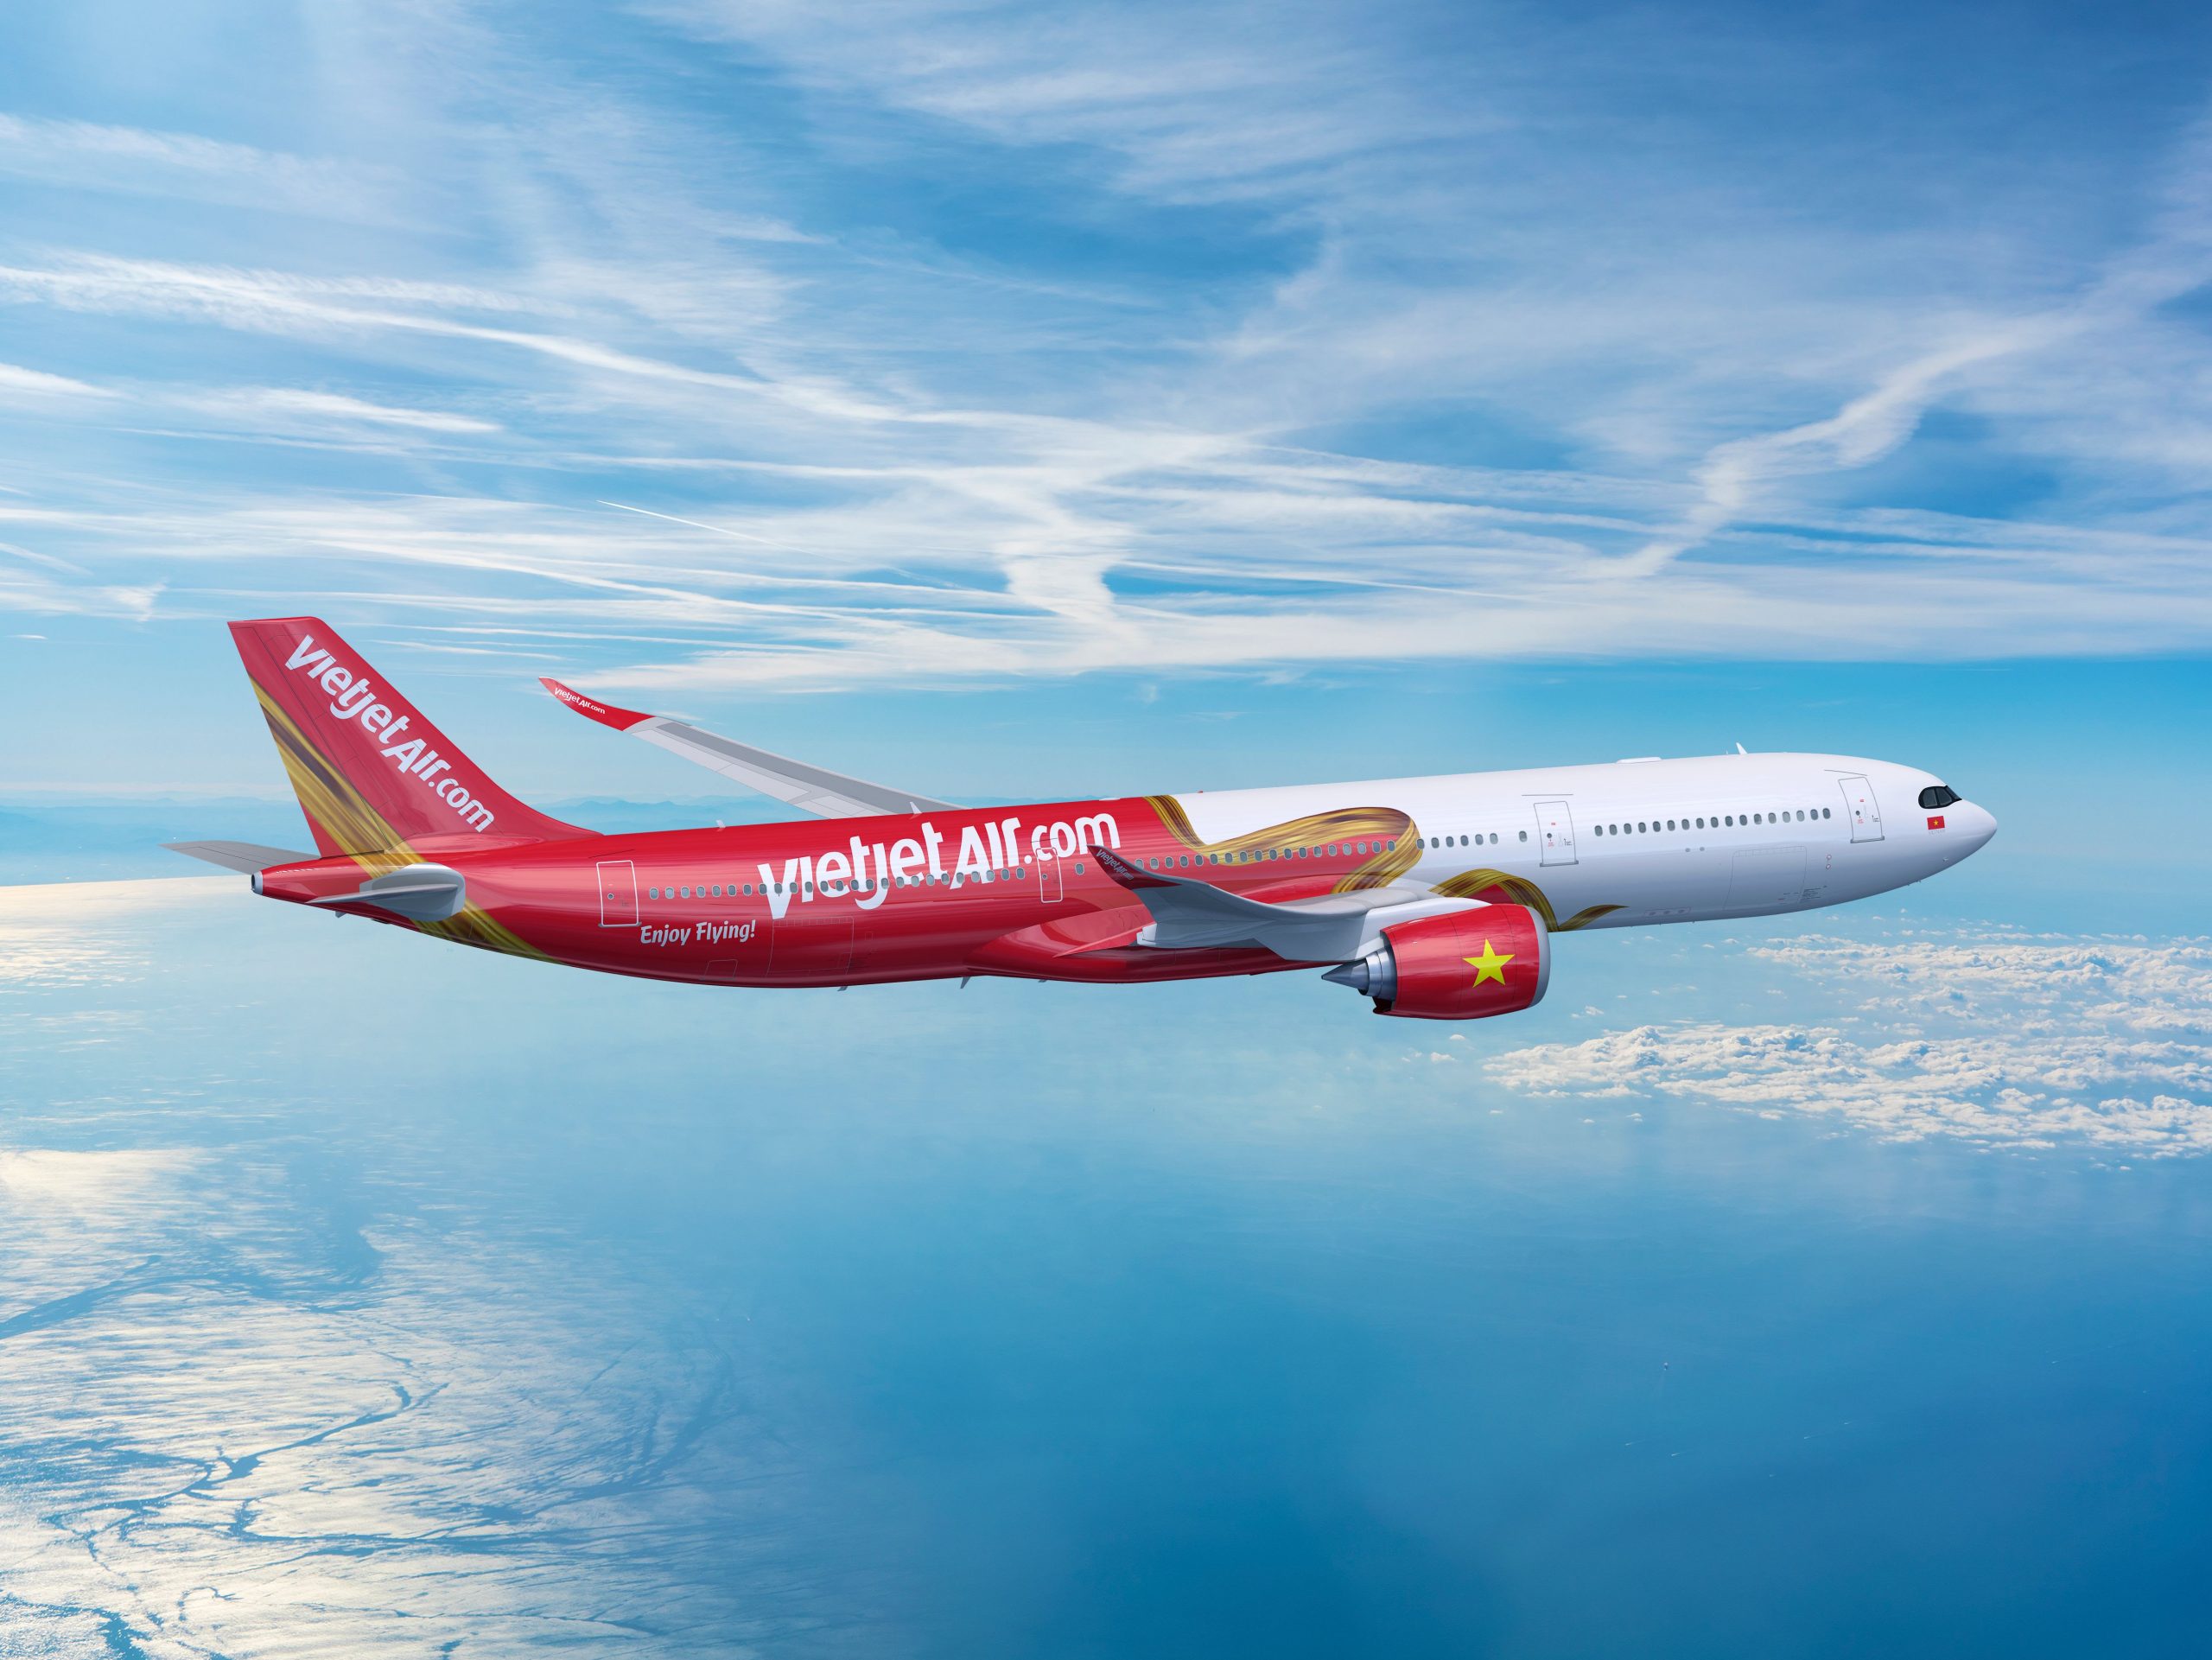 Vietjet announces new direct flight route from Ho Chi Minh City to Vientiane